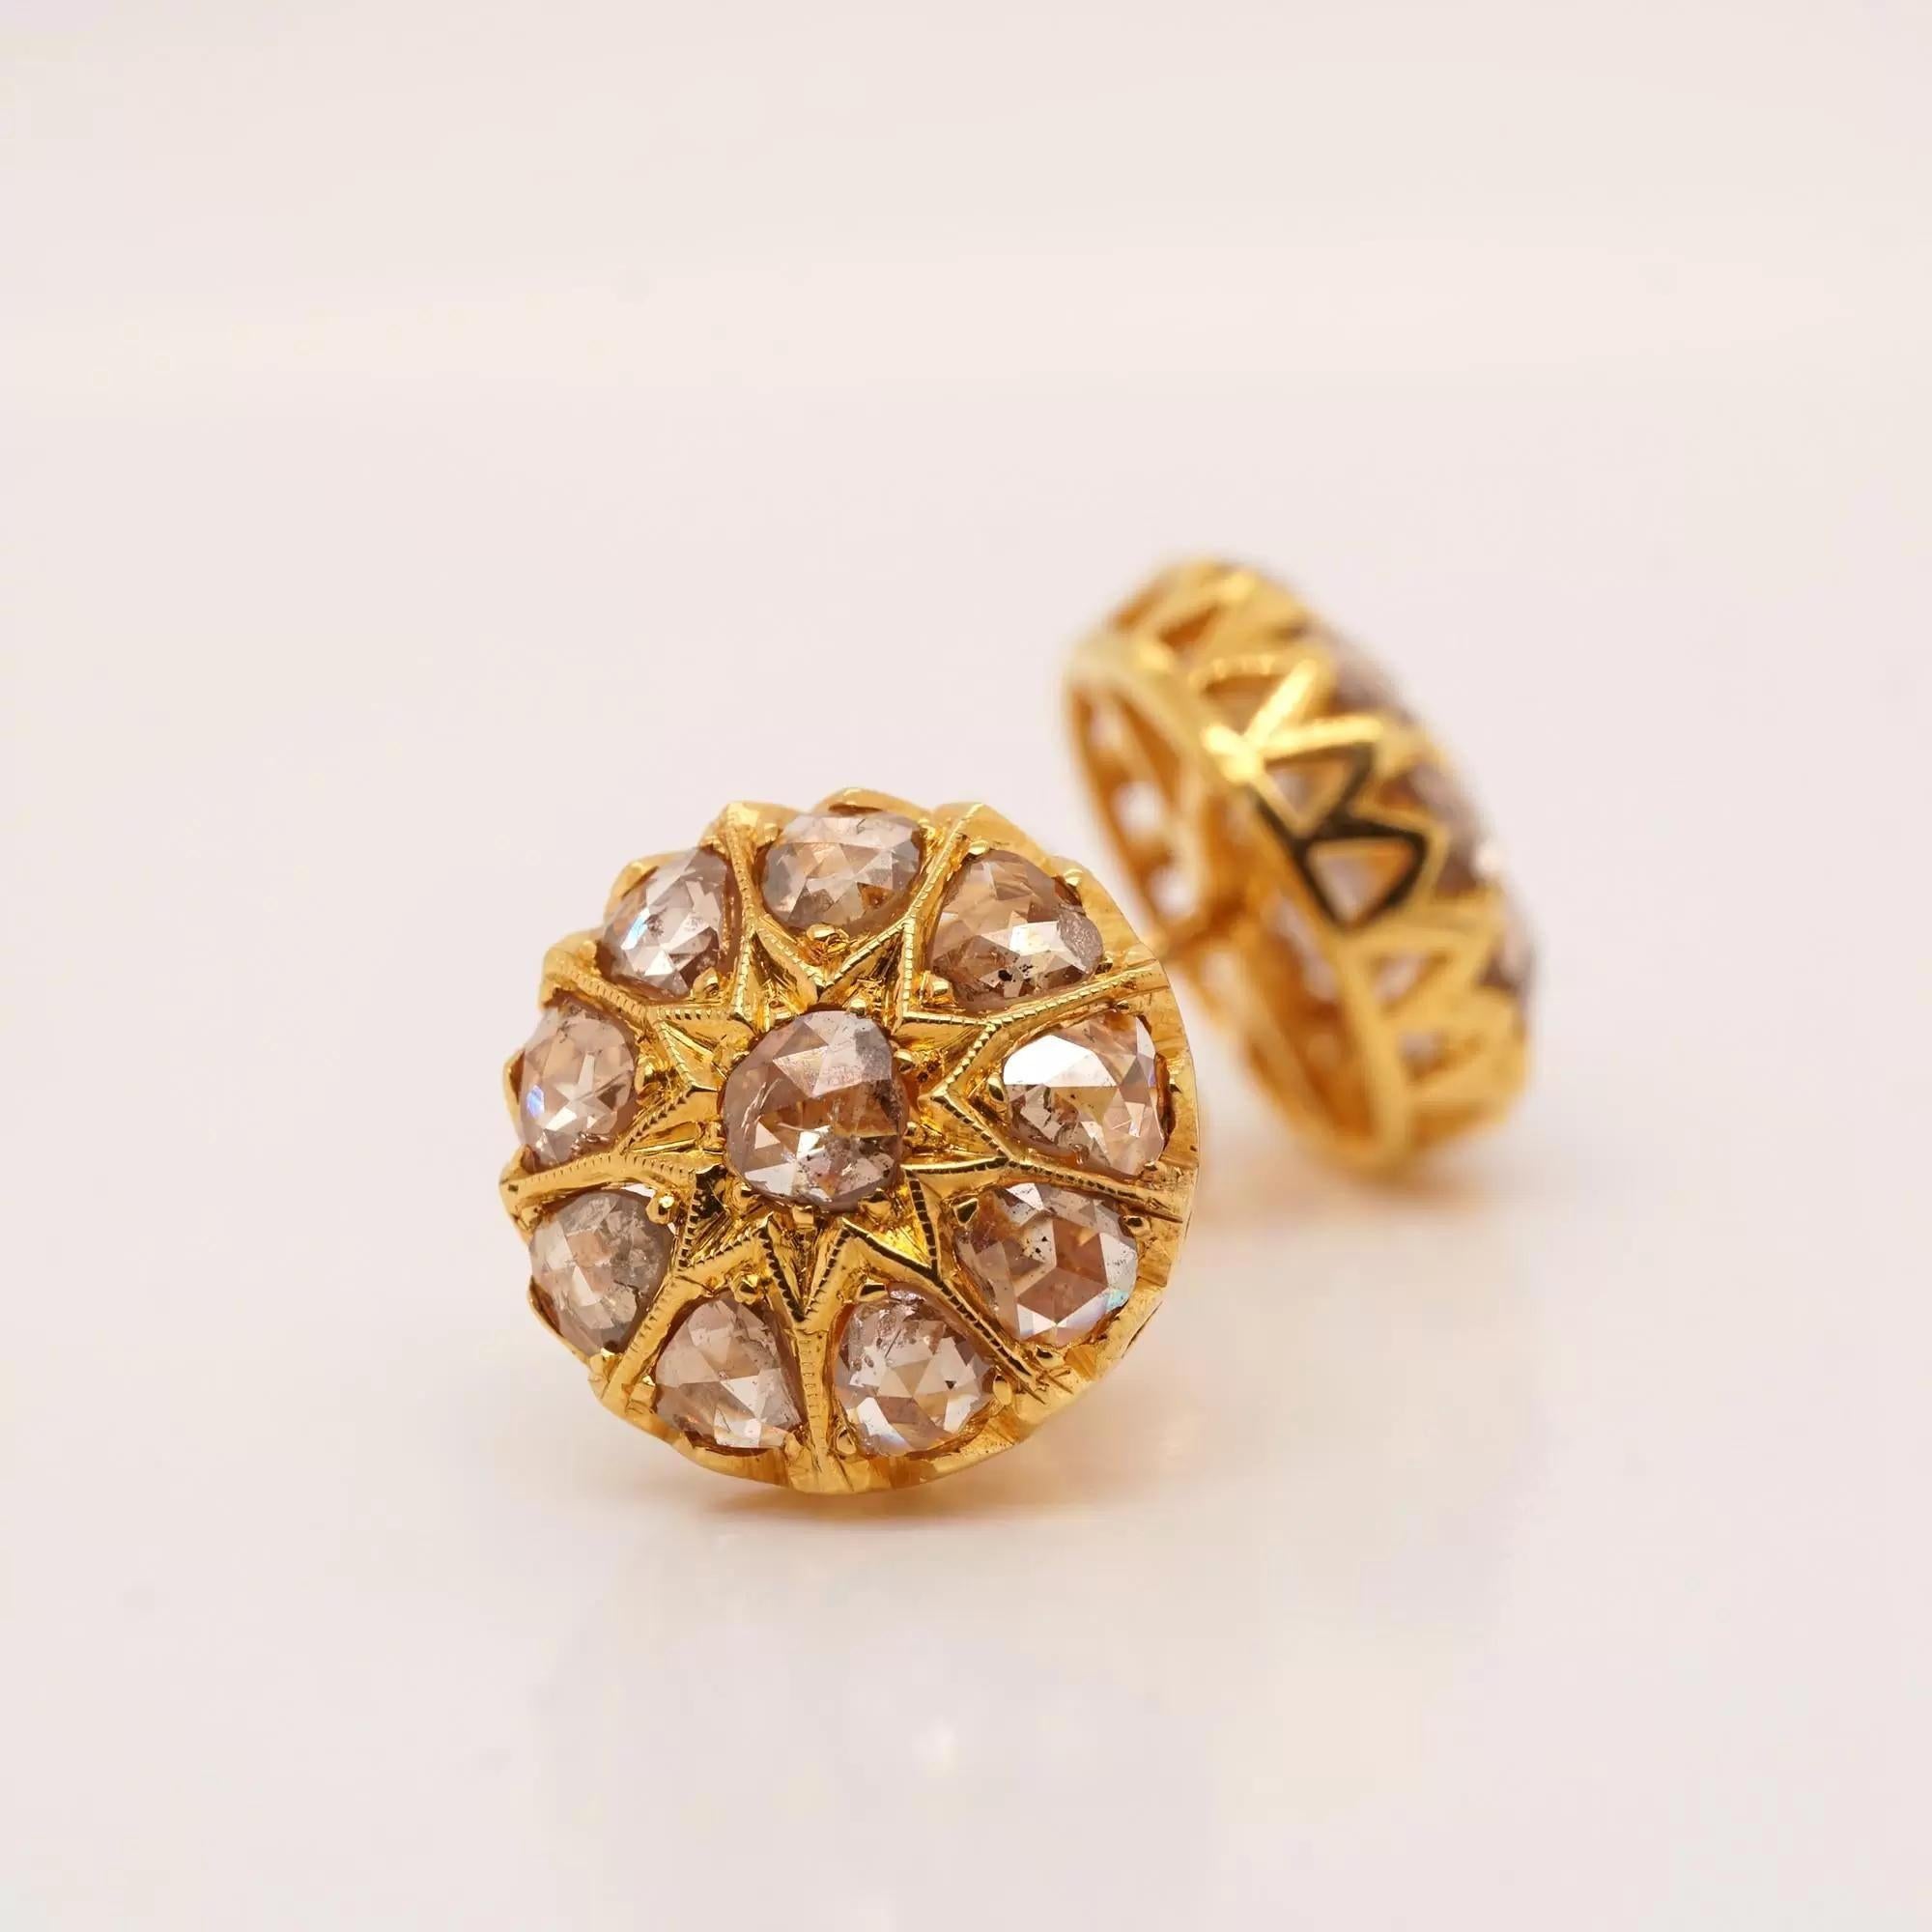 Flower Style Rose Cut 9ky Gold Earrings are made using round-shaped rose cut diamonds which have very shallow facets on one side for use in vintage jewelry as opposed to industrial use. This Rose cut diamond earring is a masterpiece, hand-crafted